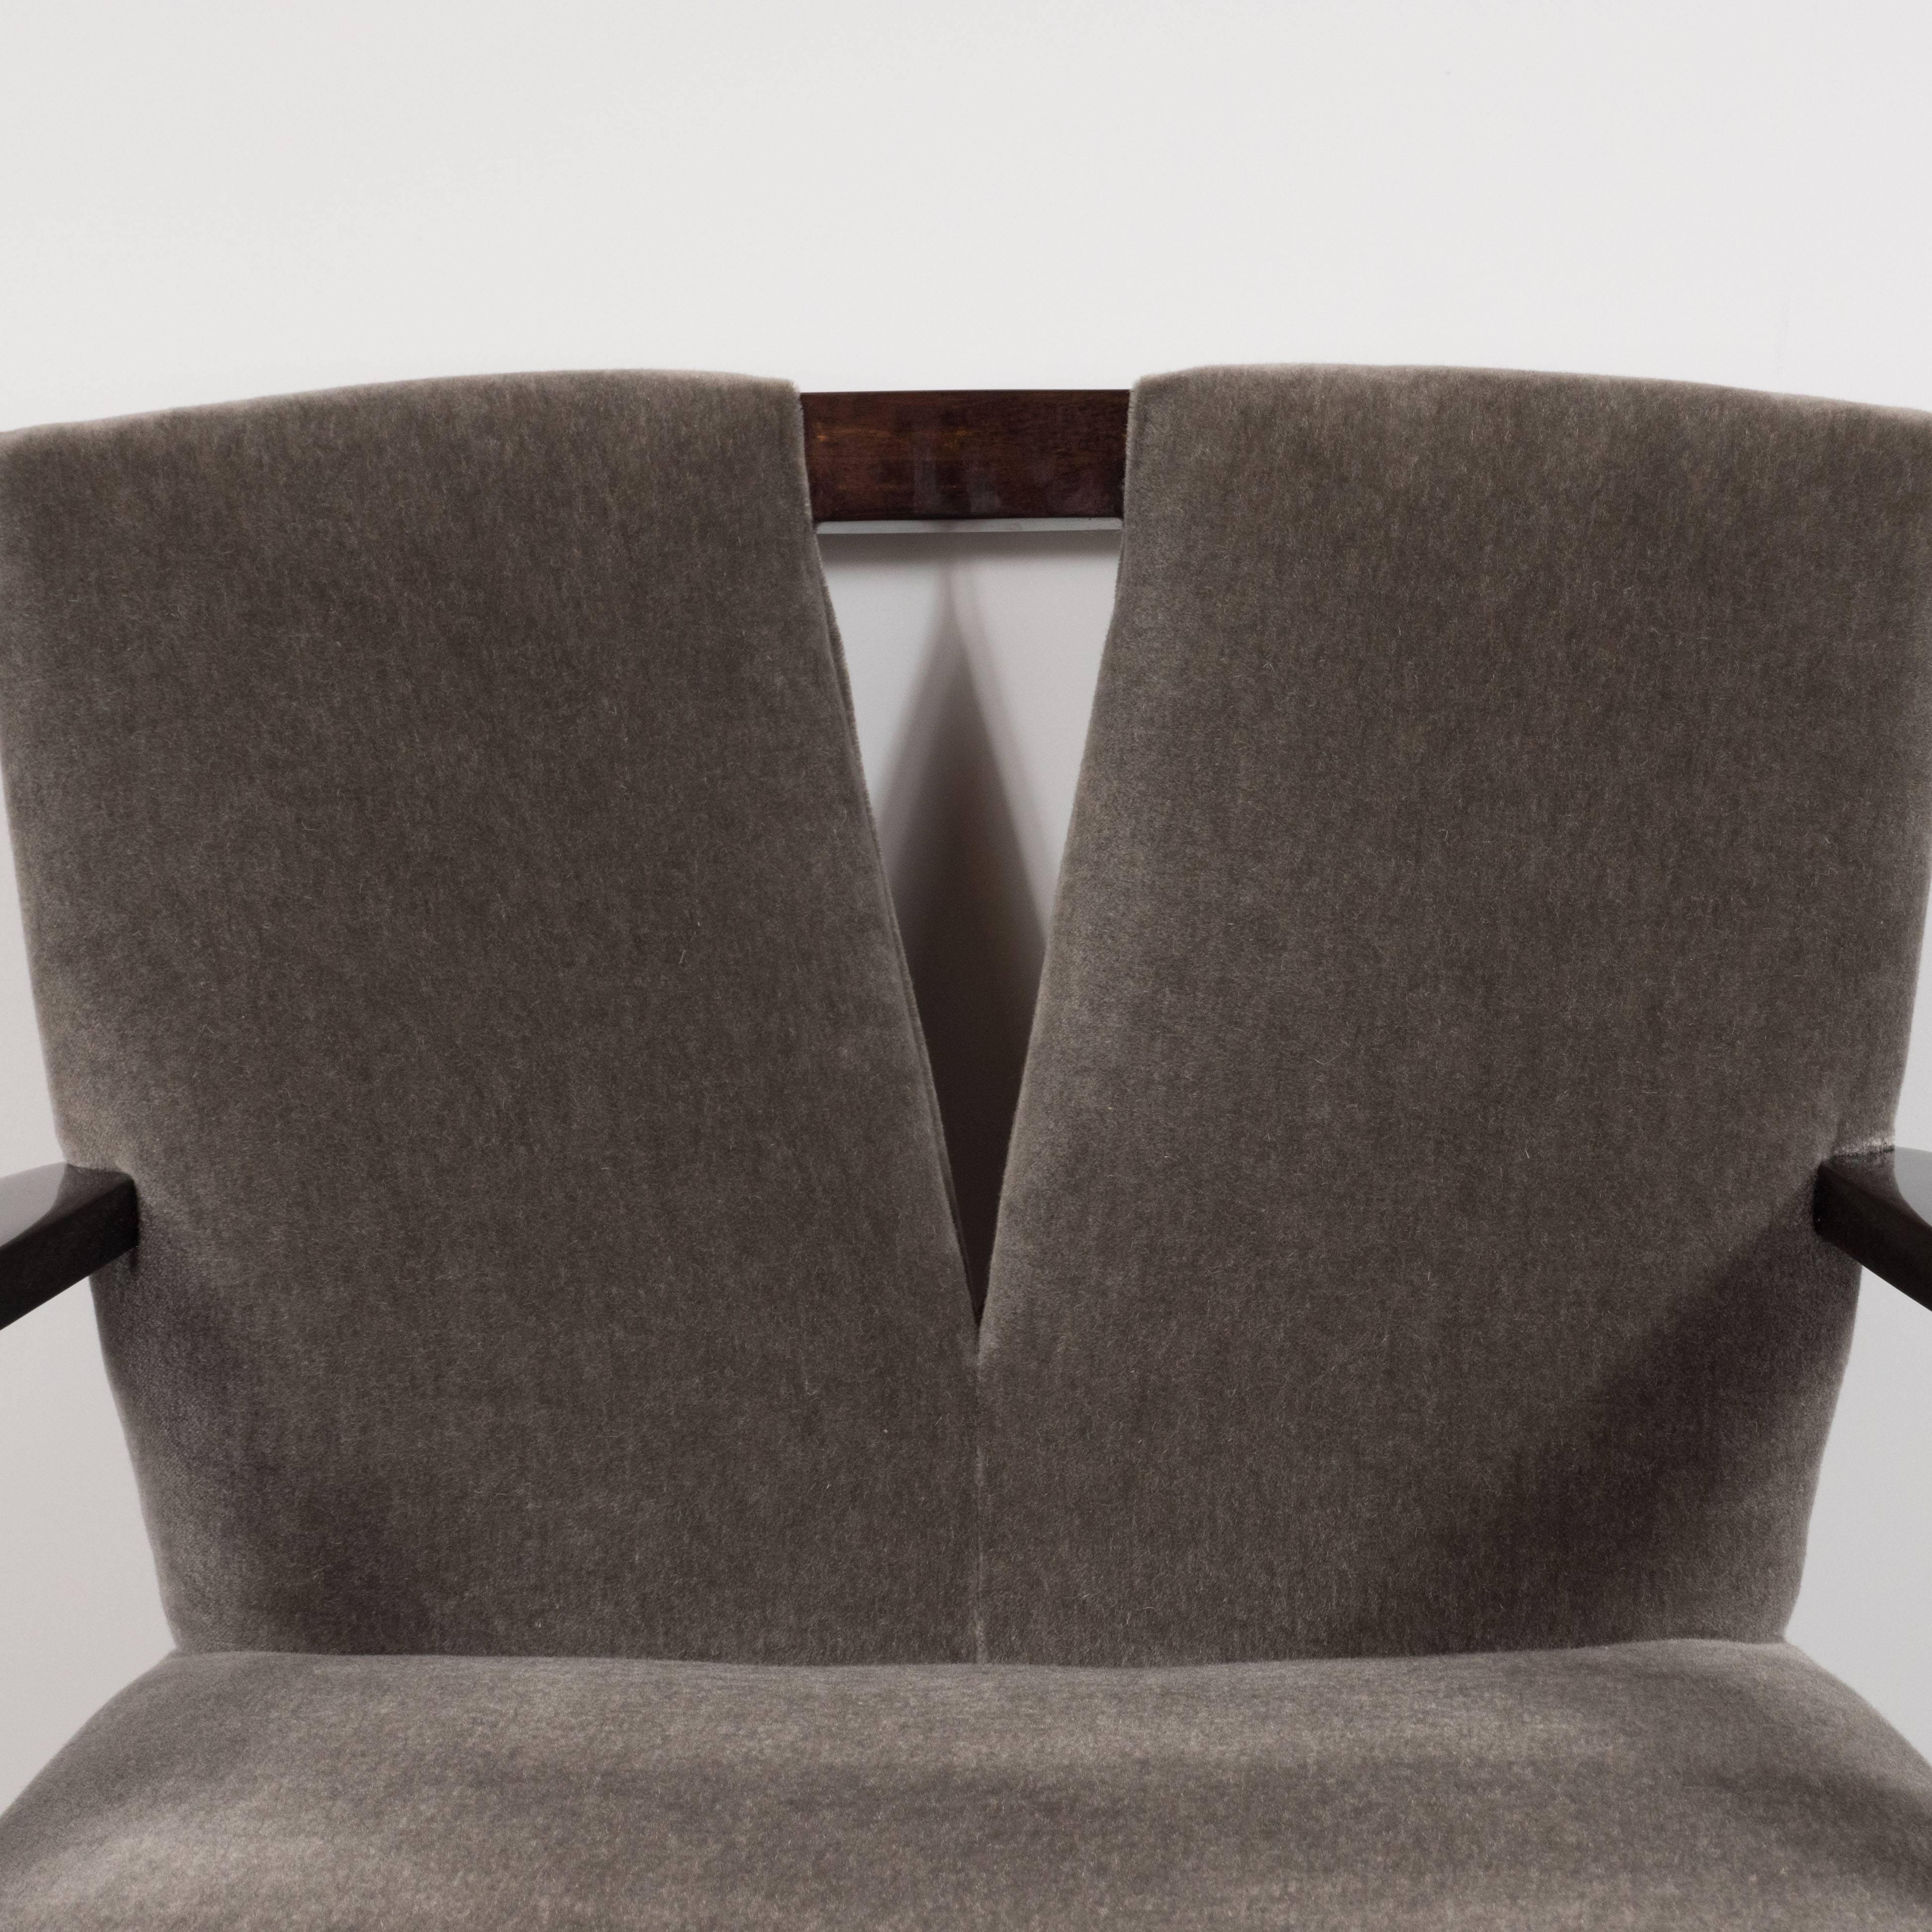 Mid-20th Century Mid-Century Modern Plunging Neckline Occasional/Desk Chair by Paul Frankl